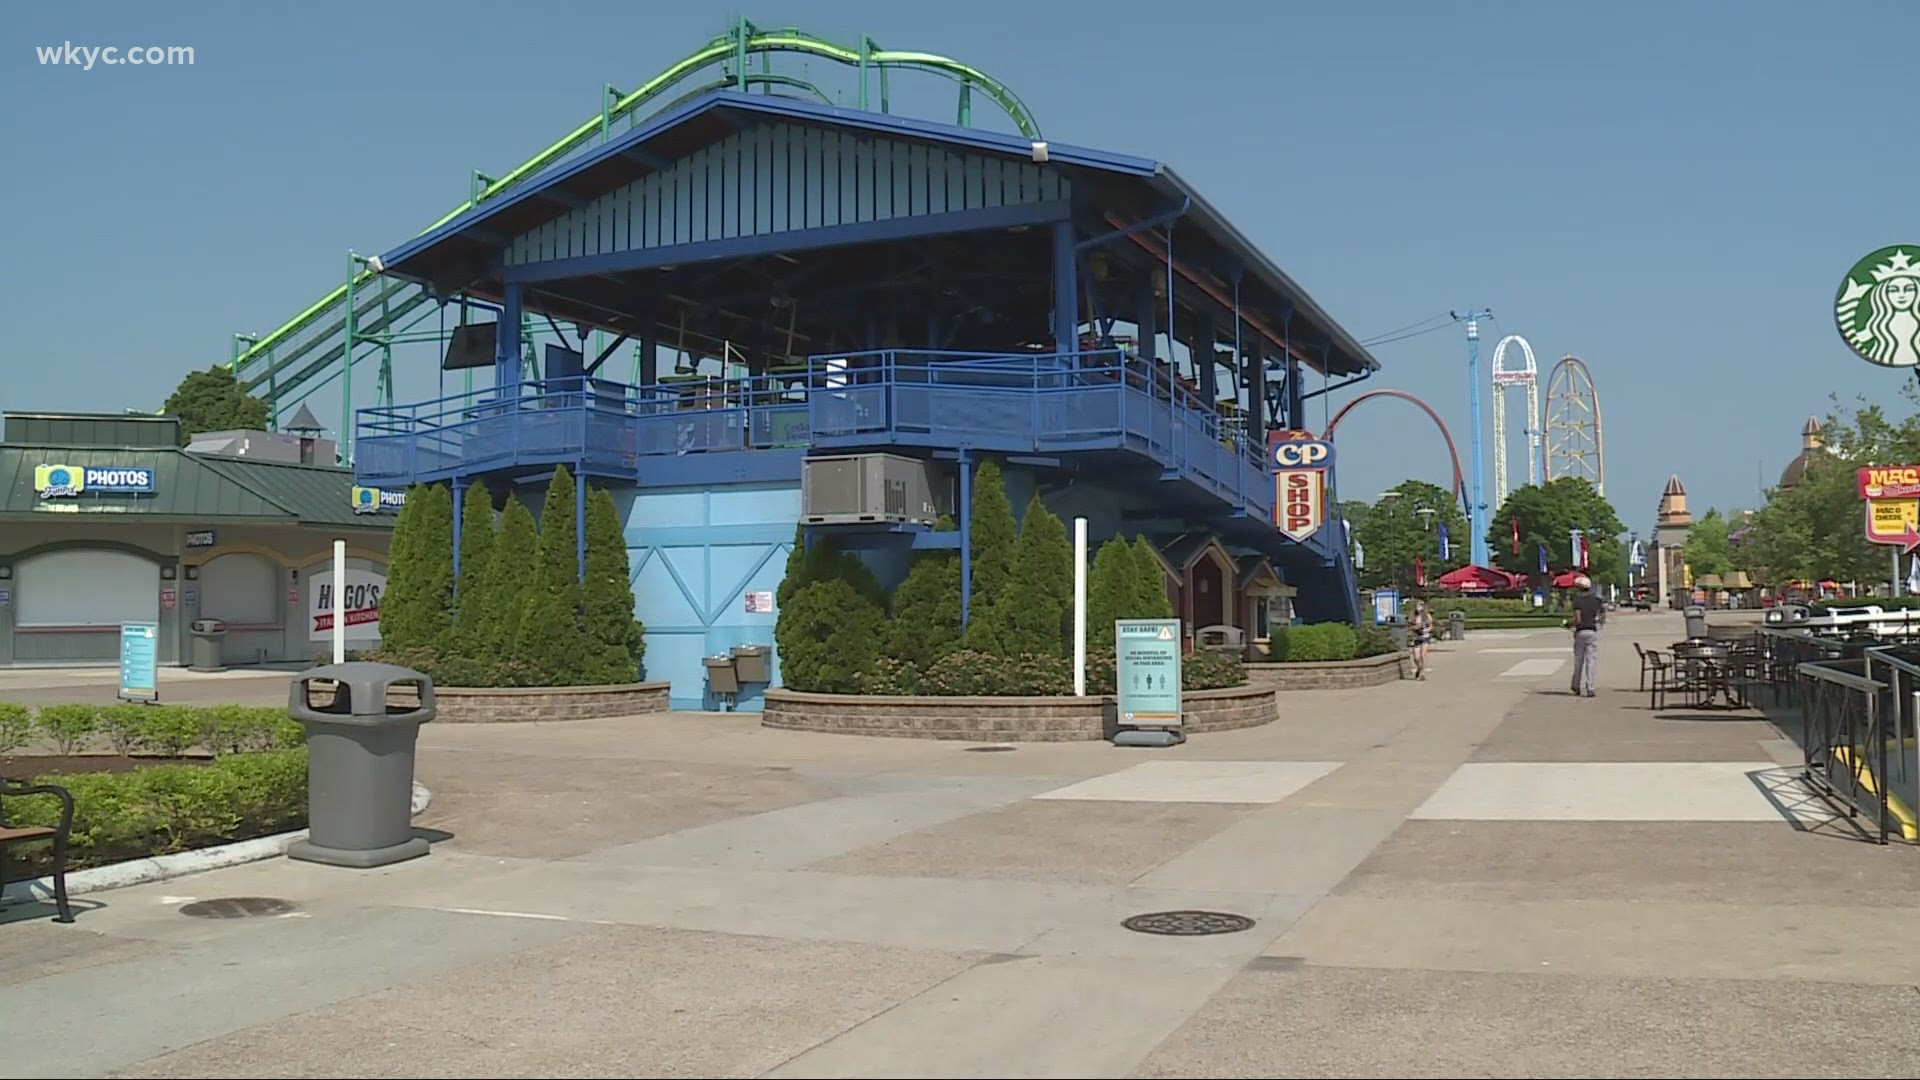 Cedar Point is easing some restrictions while also making sure that guests are safe this summer. Romney Smith has all the details.